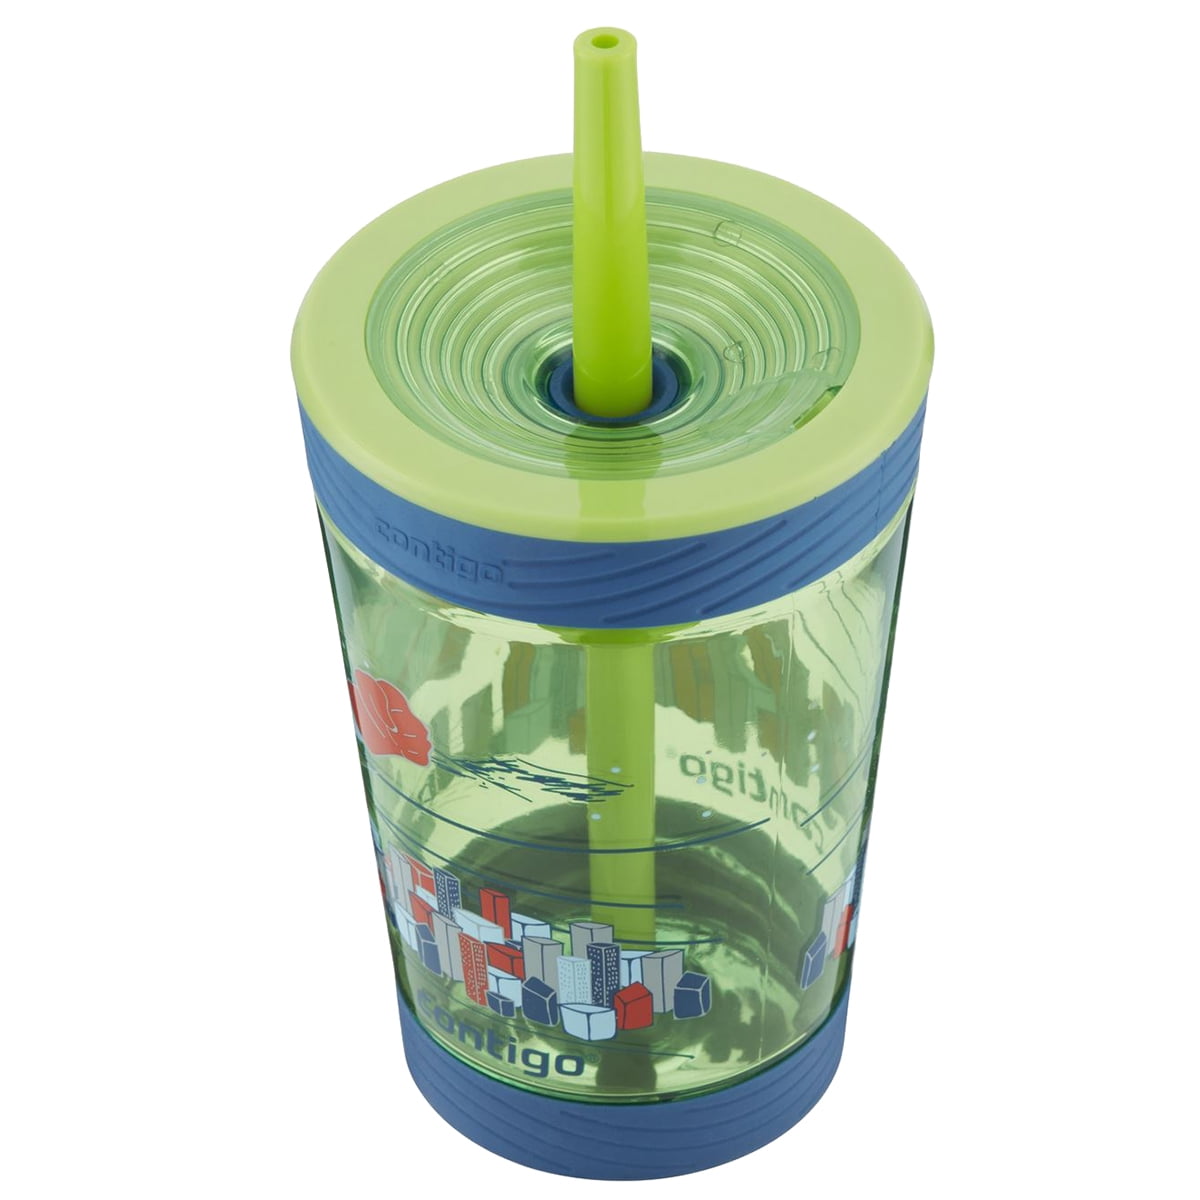 Contigo Kids Straw Tumbler, Sprinkles with 4C Adventures Into the Woods, 14 Ounce